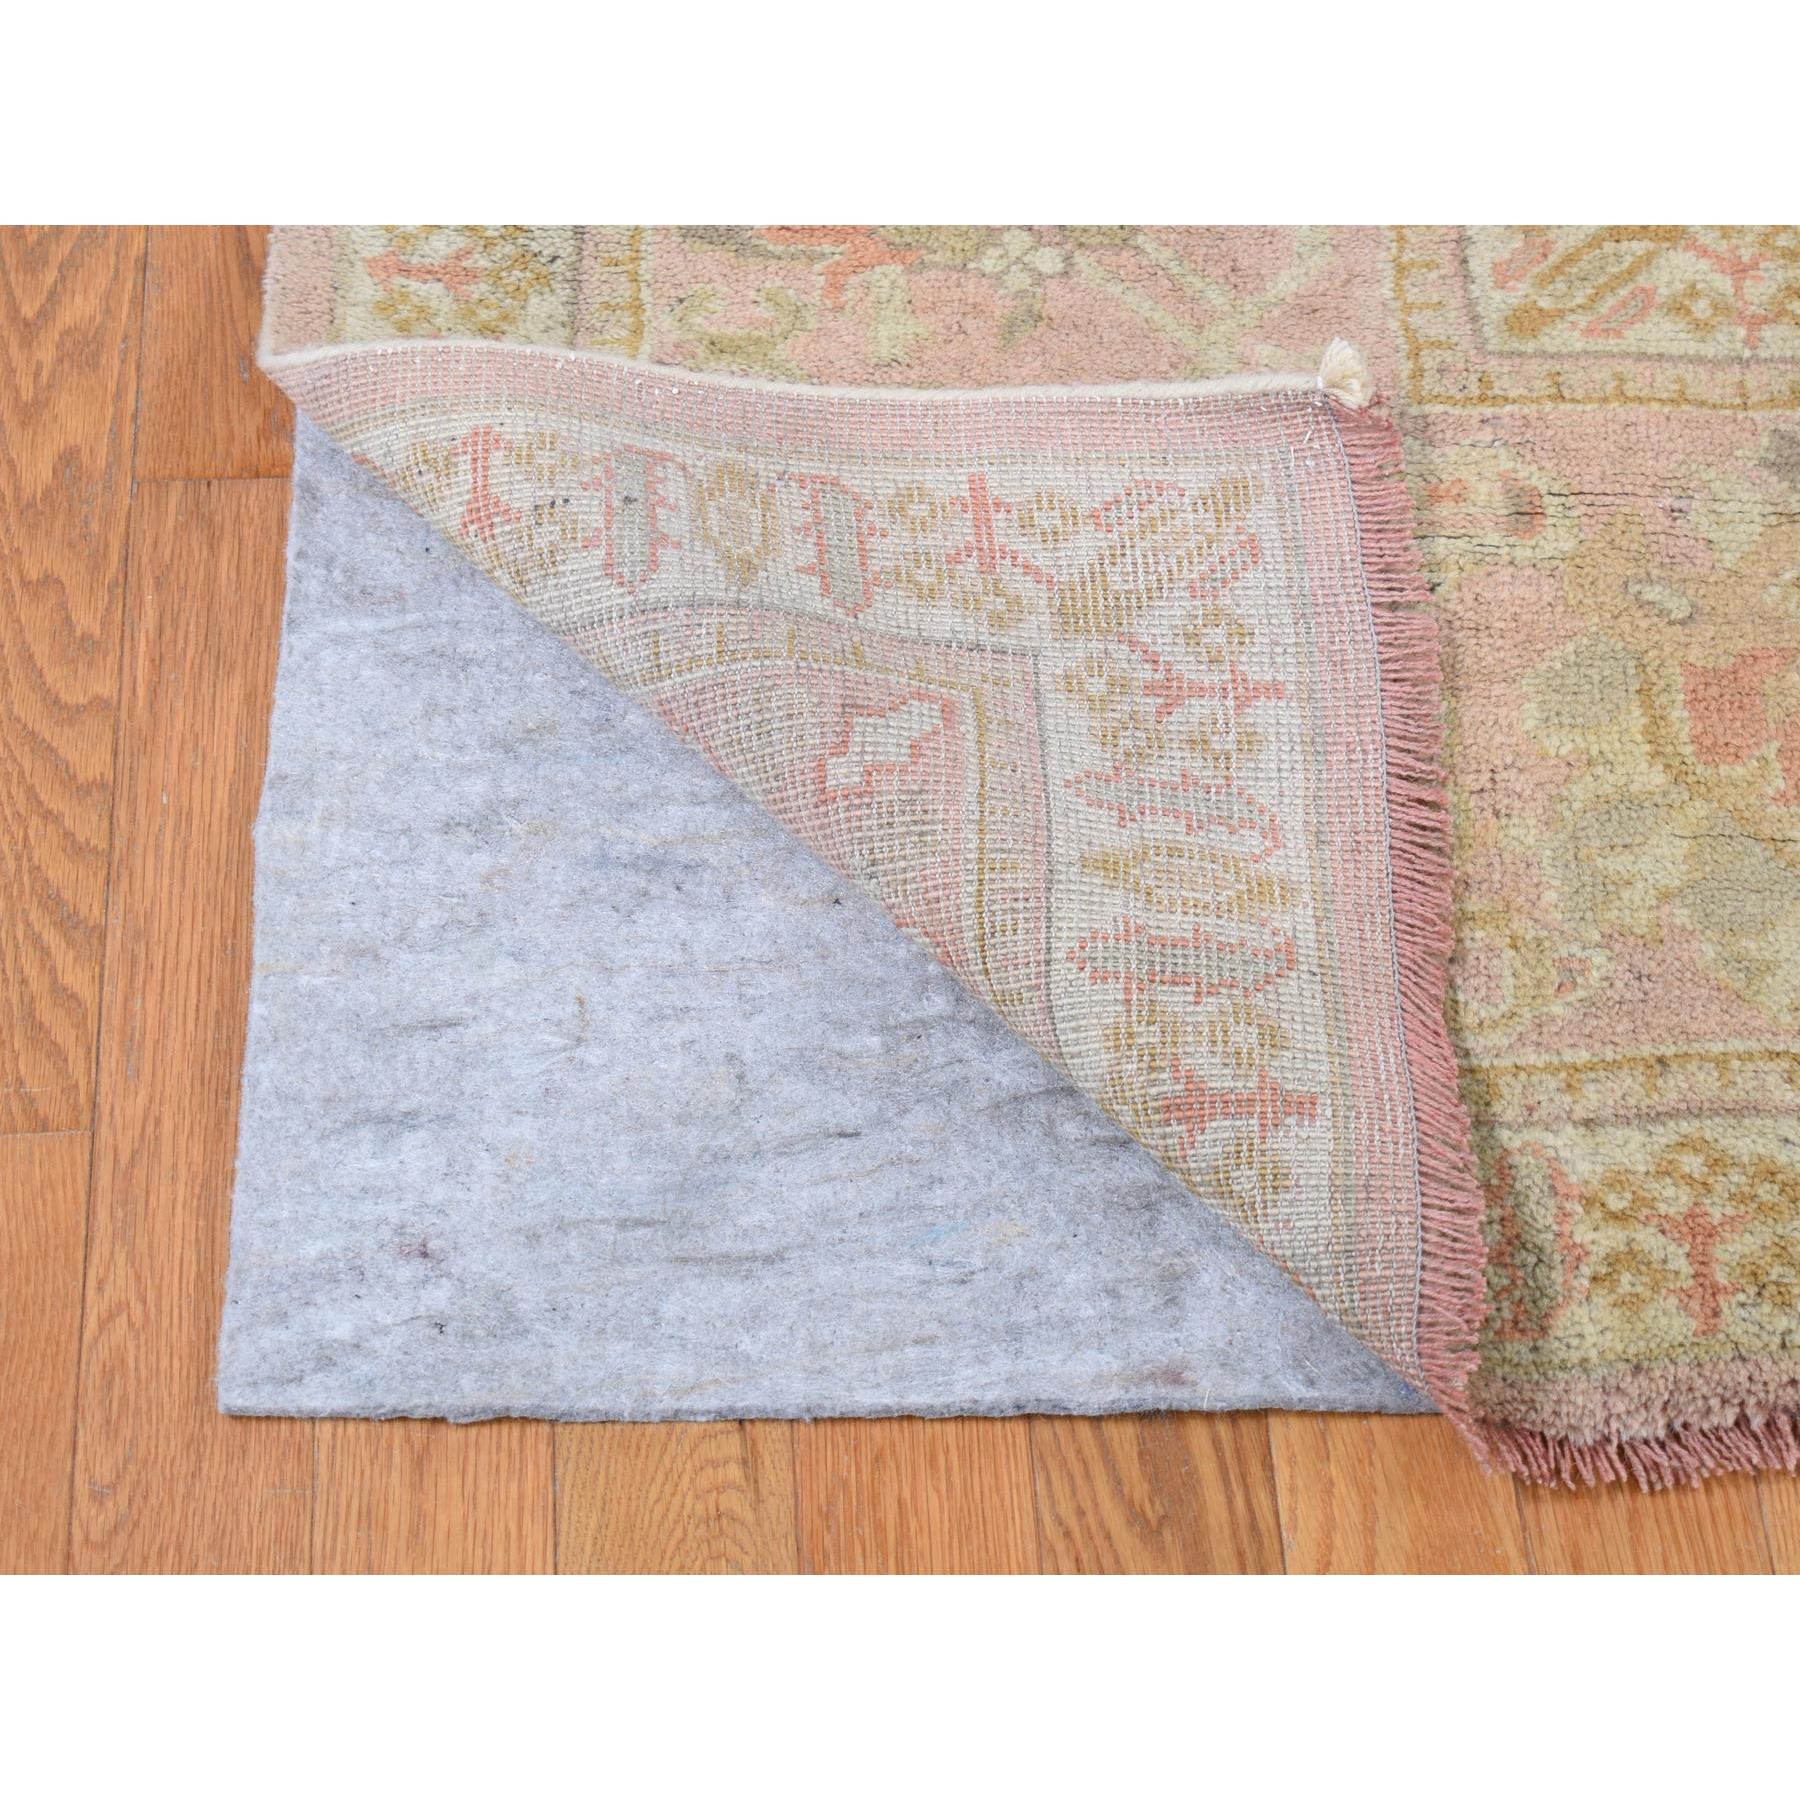 11'x16' Cream Color, Antique Turkish Oushak with Soft Pastel Colors, Clean, Nice Soft Pile Throughout, Sides and Edges Professionally Secured, Hand Woven, Pure Wool Oversized Oriental Rug 